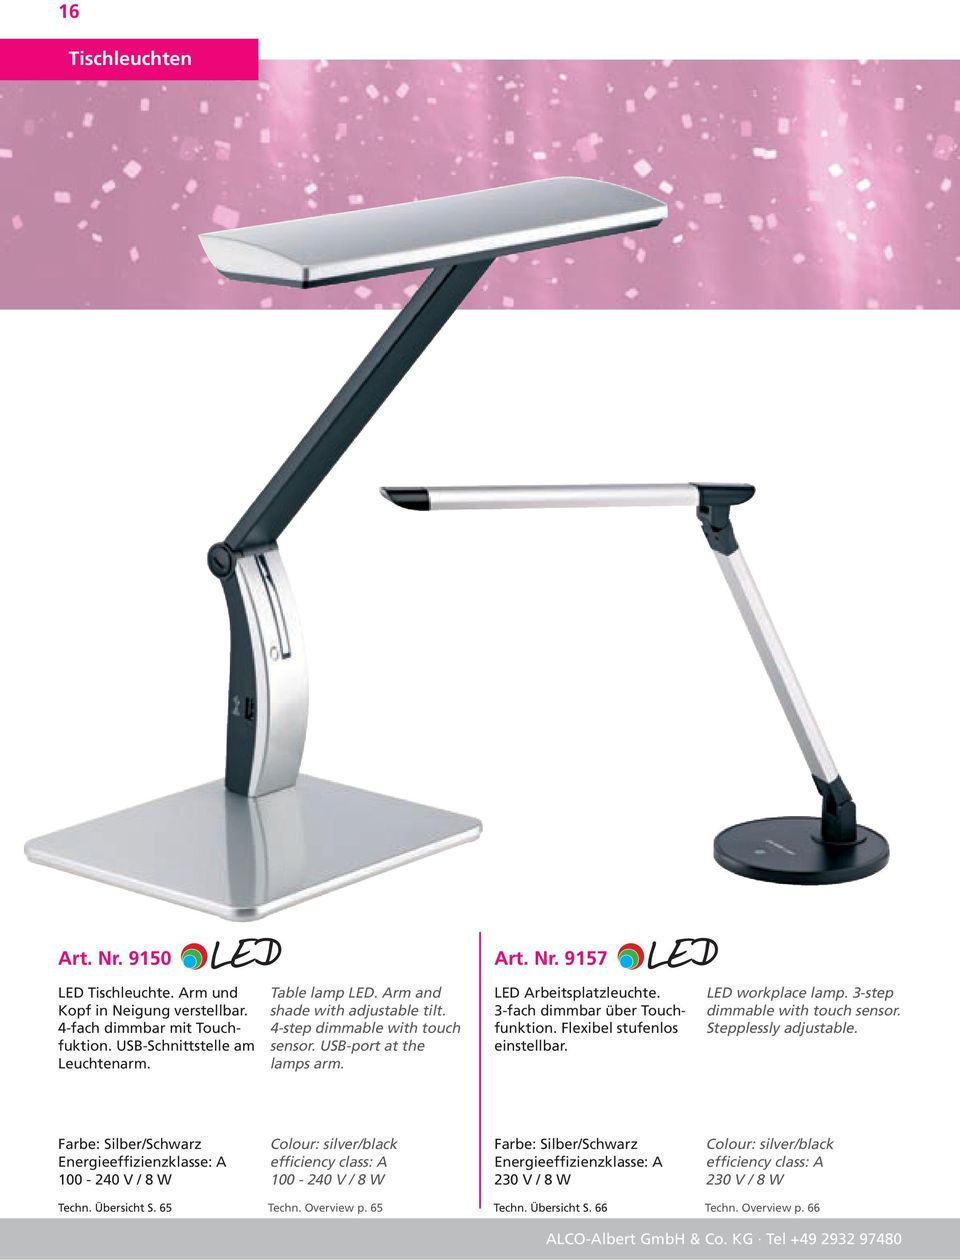 Flexibel stufenlos einstellbar. workplace lamp. 3-step dimmable with touch sensor. Stepplessly adjustable.